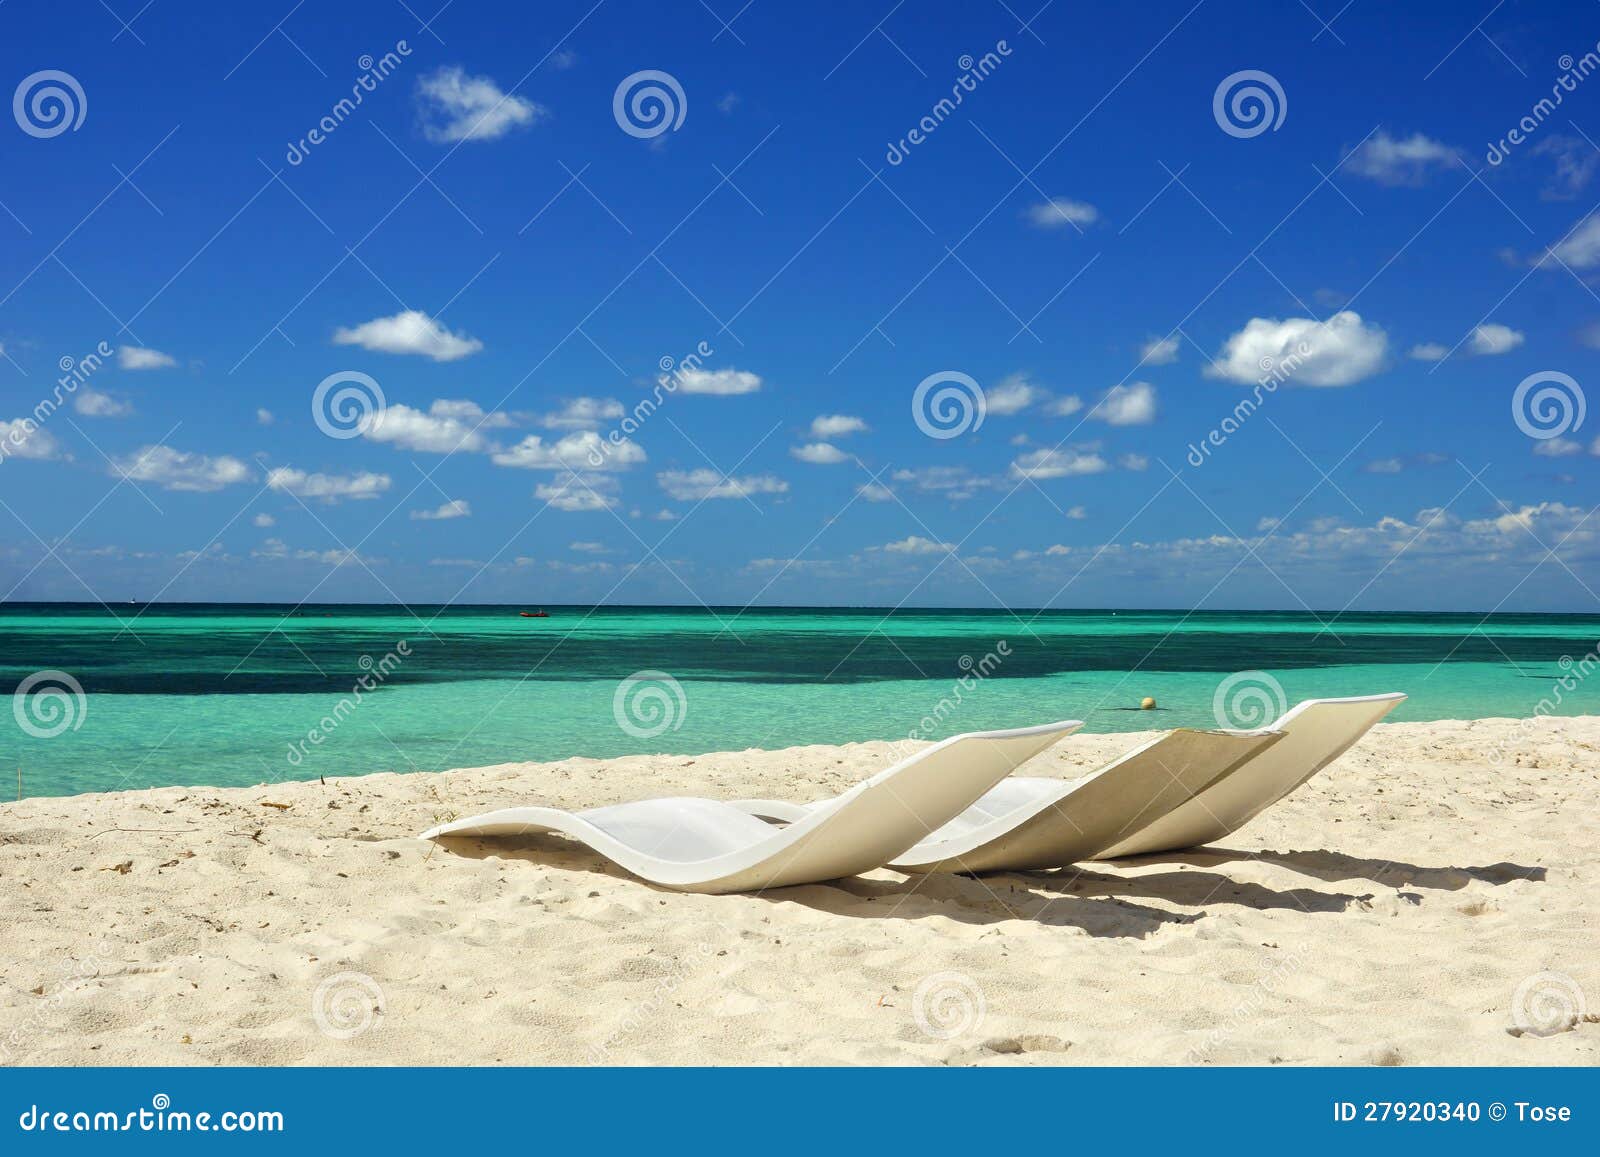 chairs on the beach, cozumel, mexico